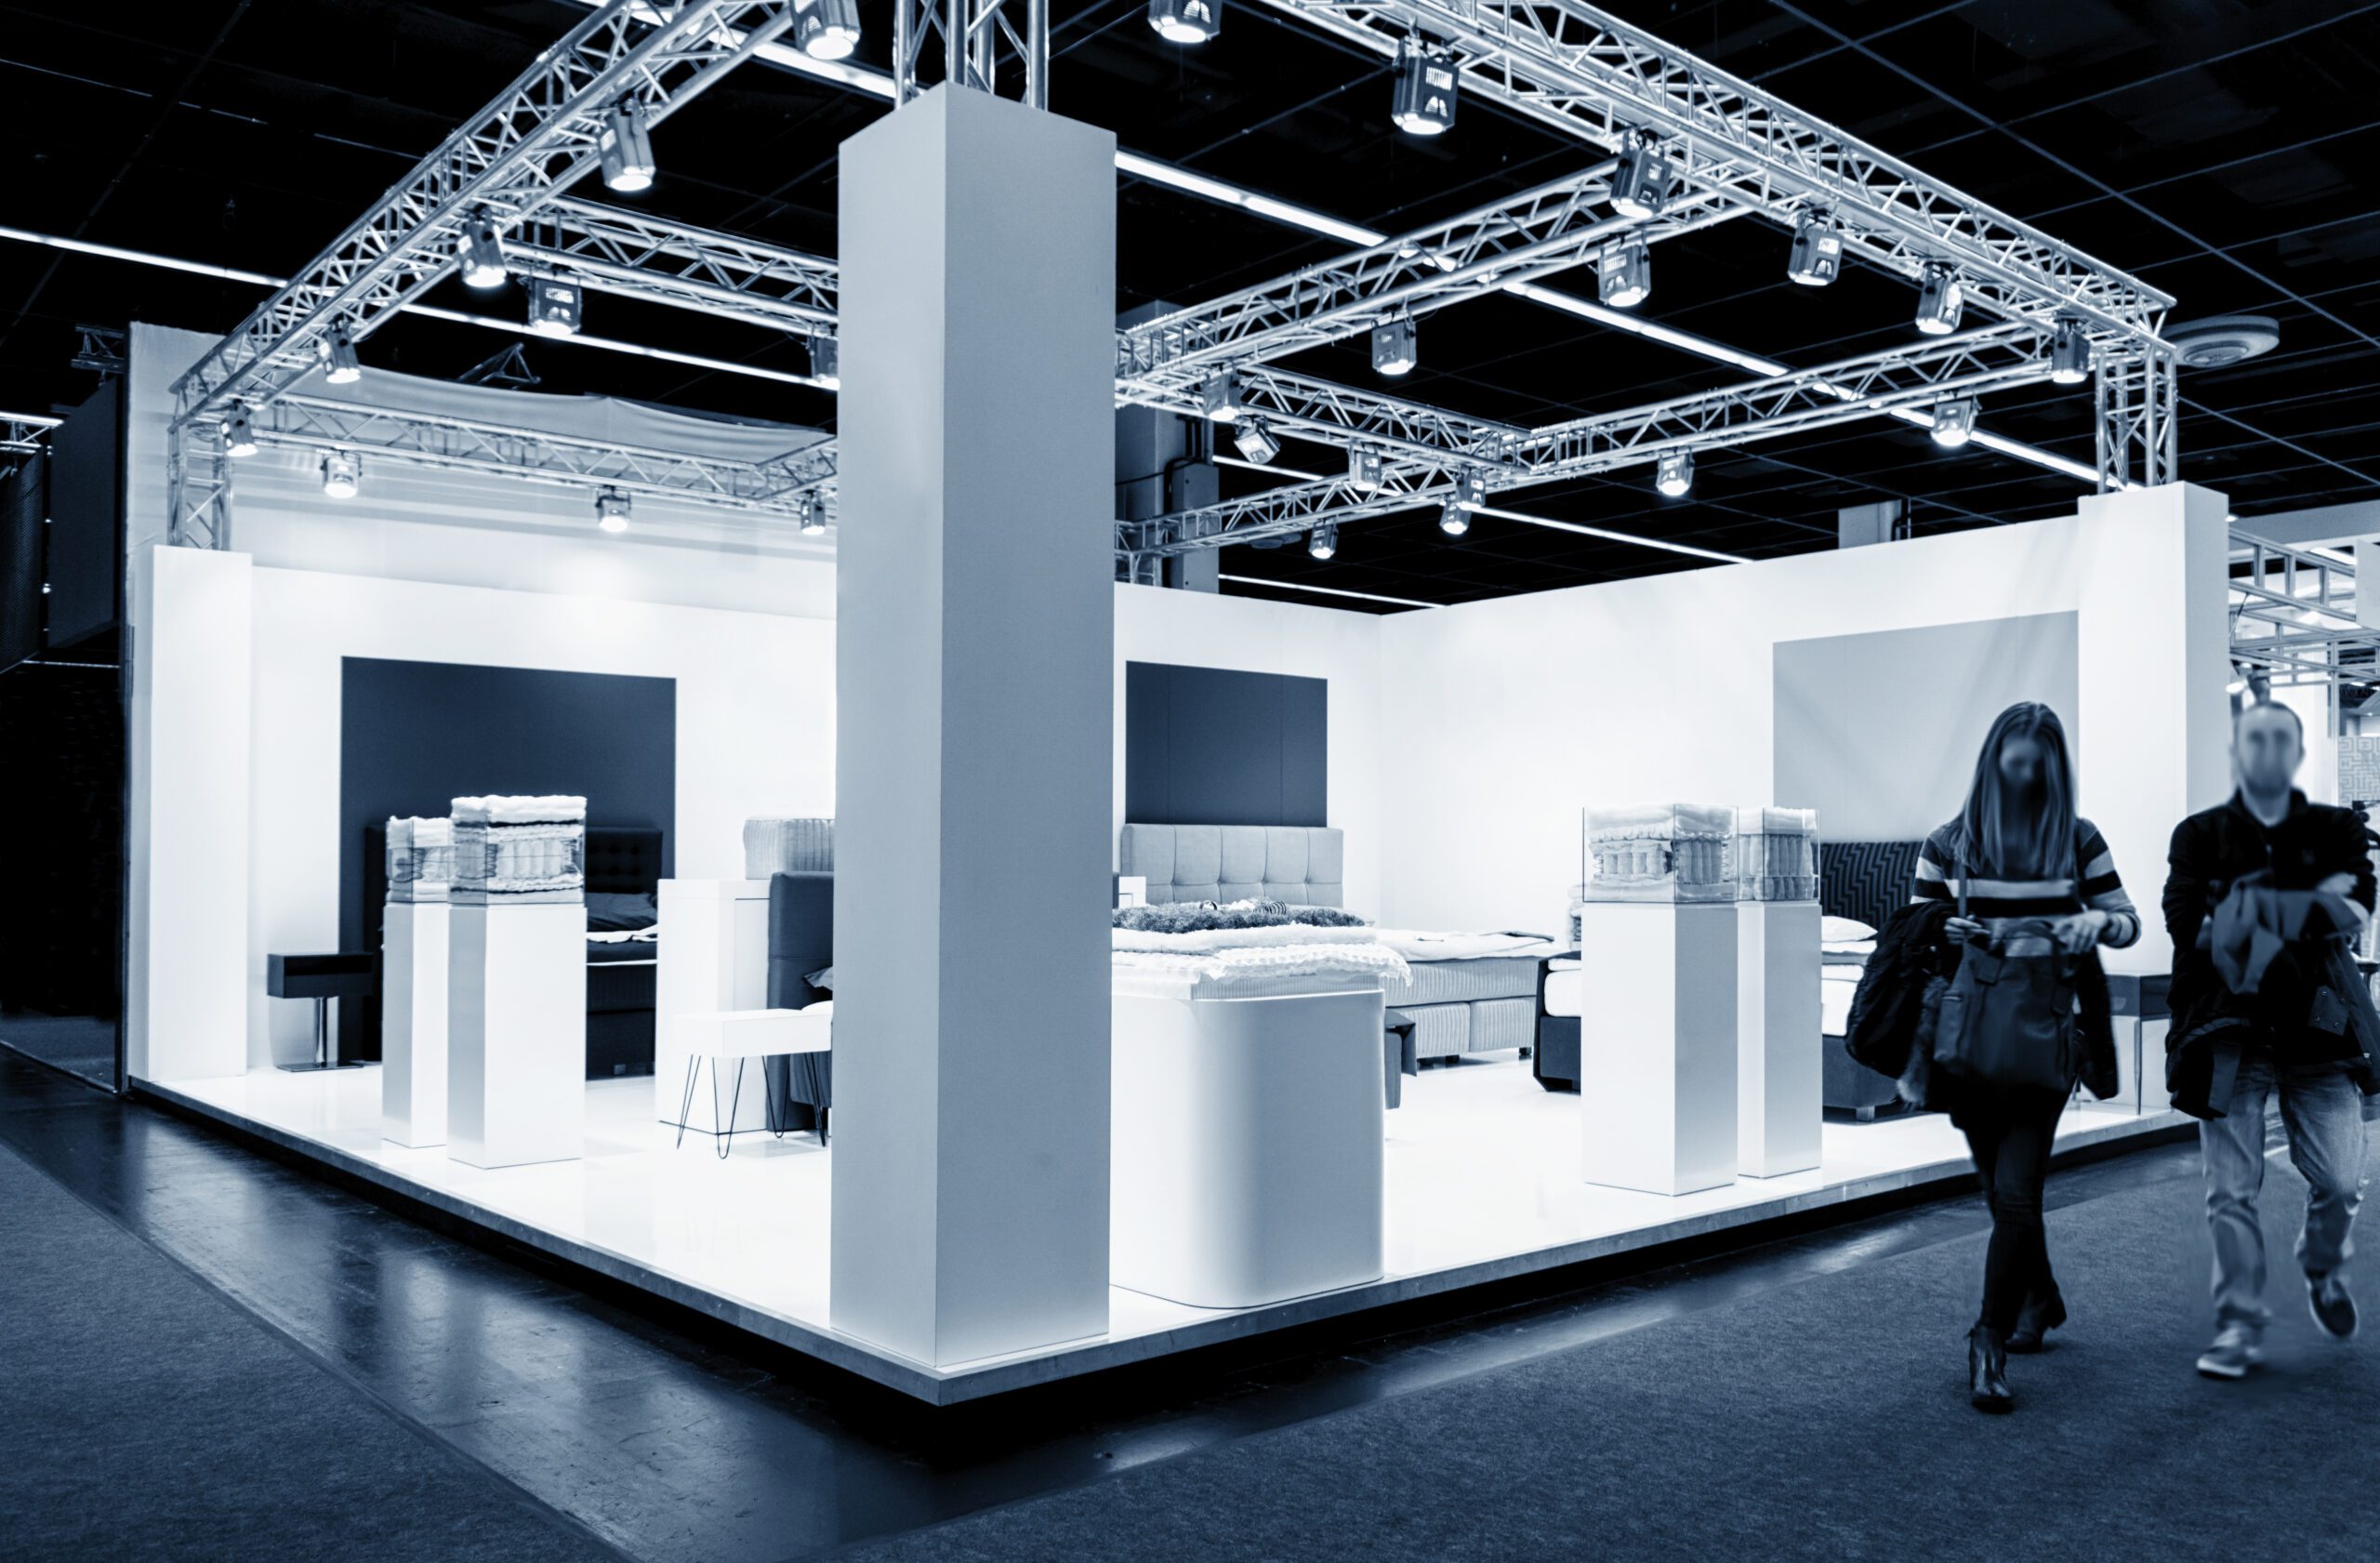 10 Ways to Make the Most of Your Next Tradeshow Appearance